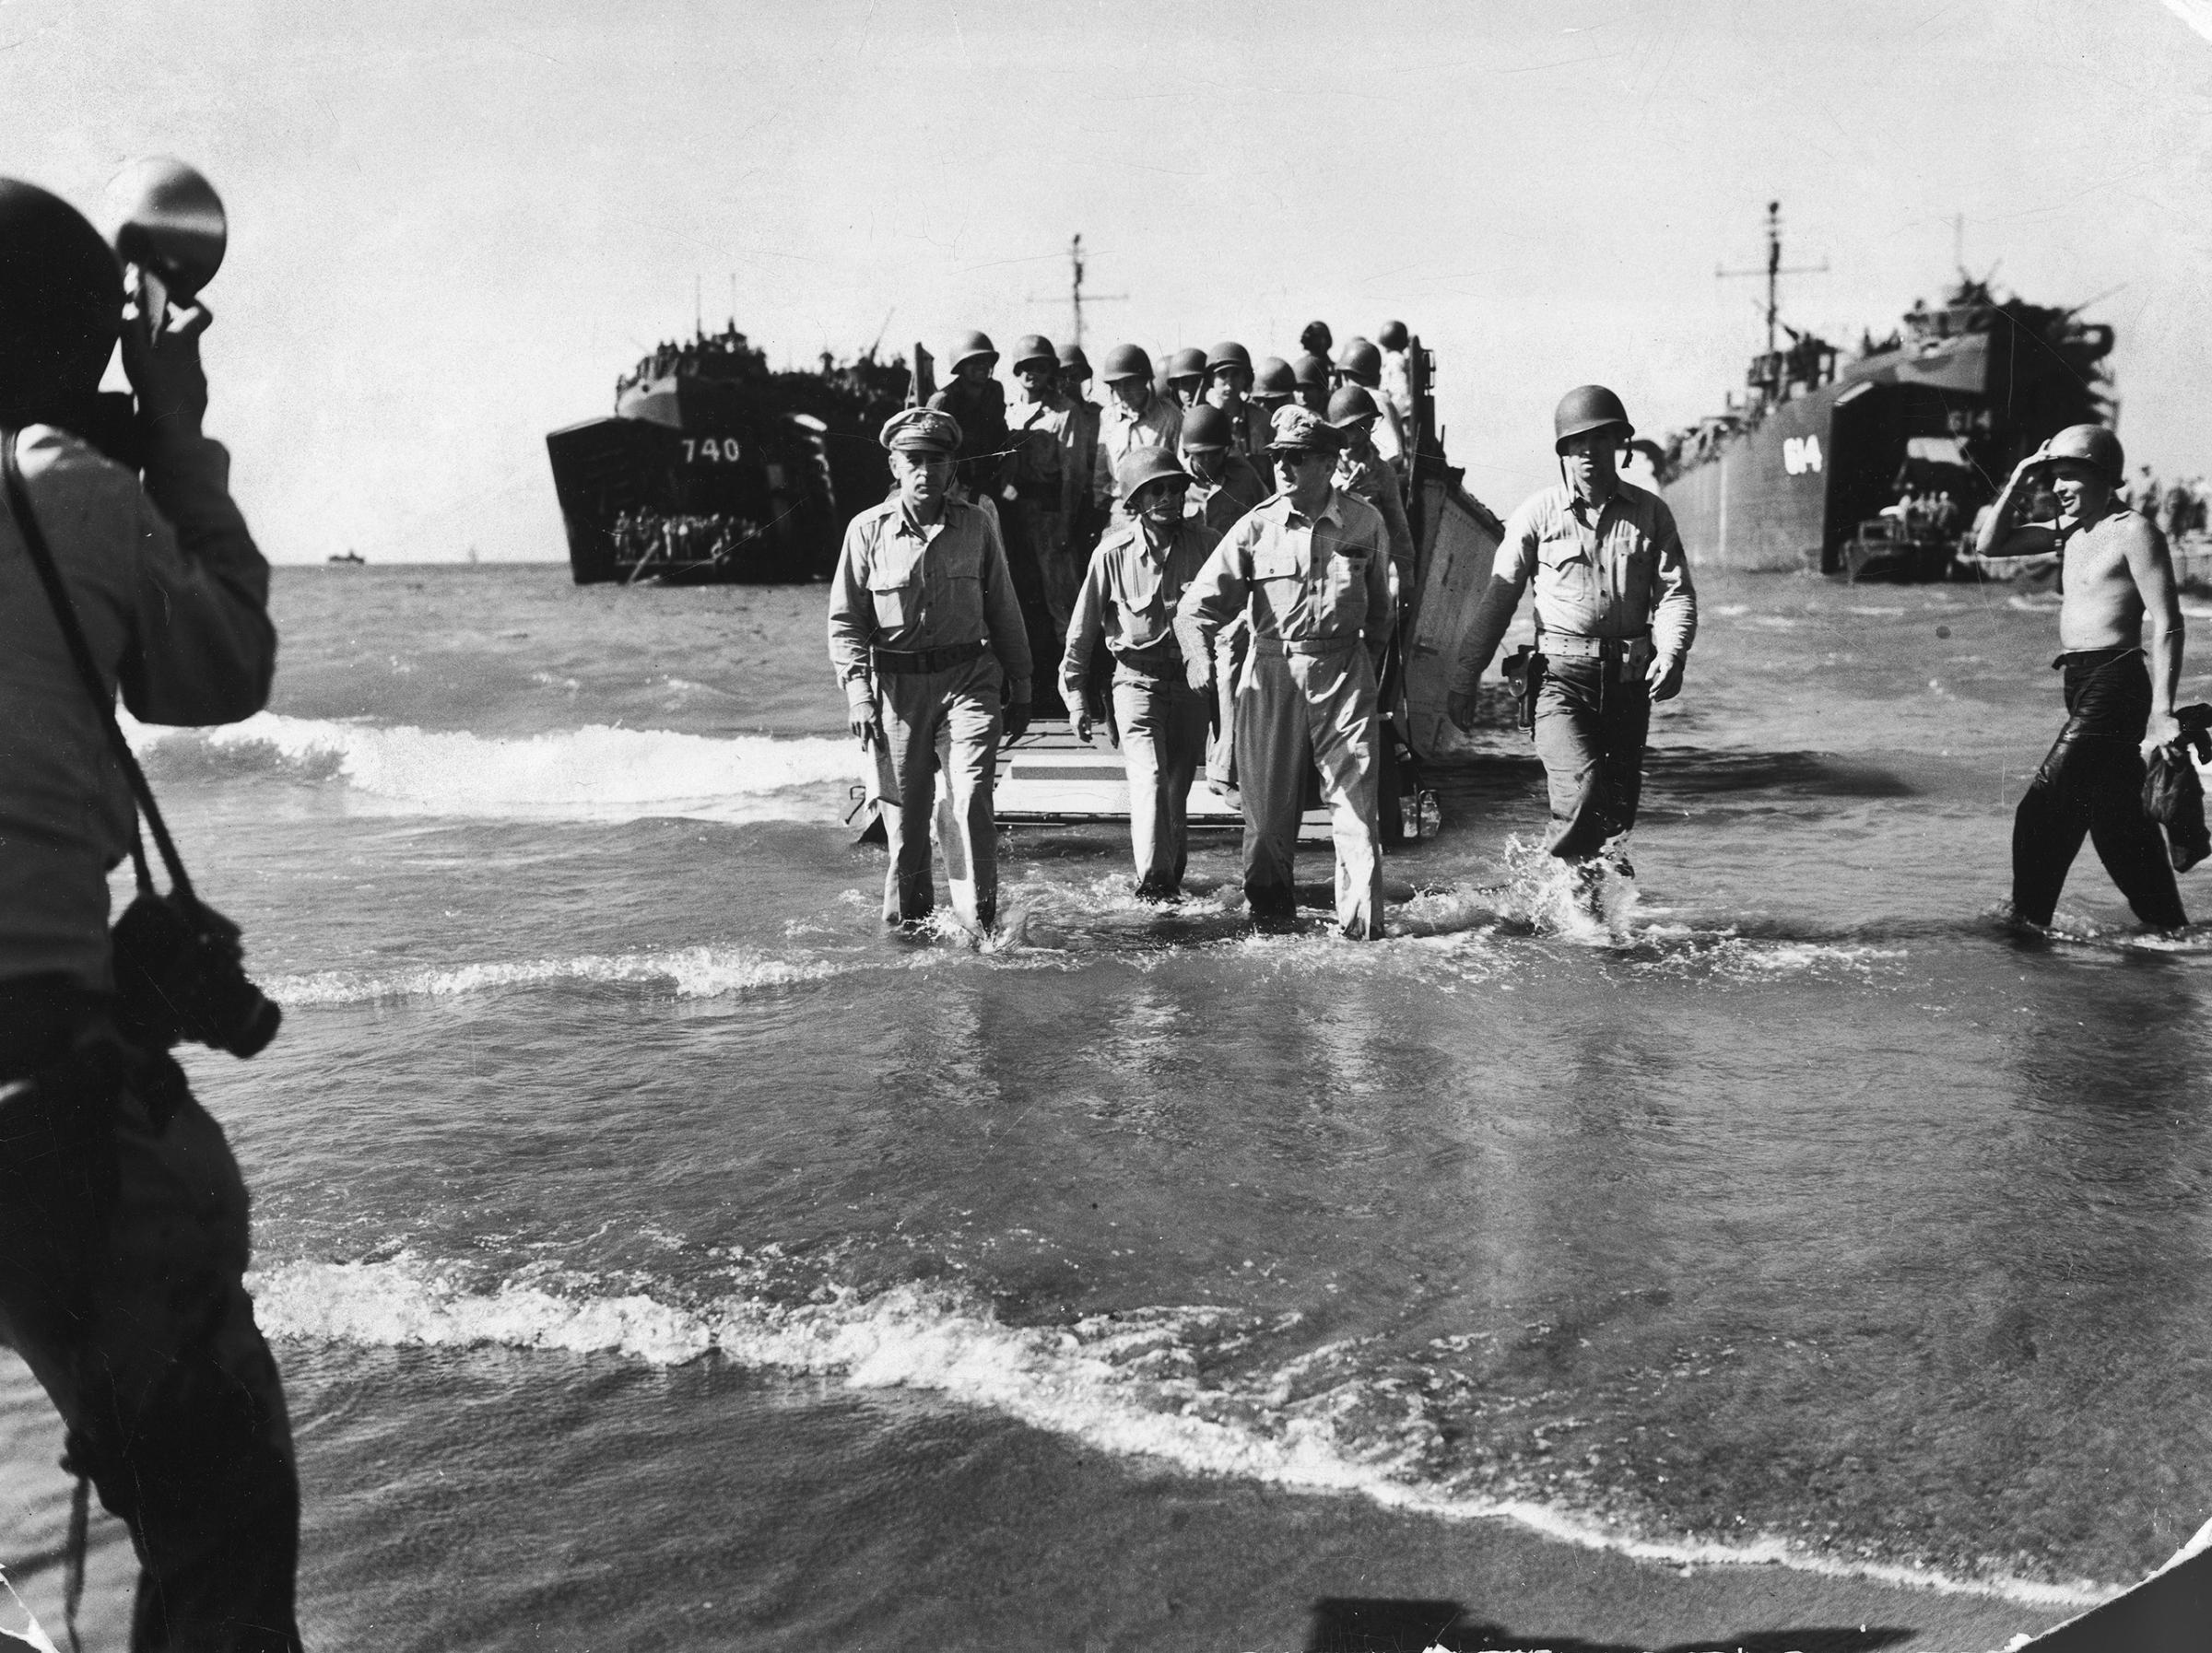 Gen. Douglas MacArthur (C), Gen. Richard Sutherland (L) and Col. Lloyd Lehrbas (2L) wading ashore during American landing at Lingayen Gulf. This image appeared in the February 19, 1945 photo essay: U.S. Wins Heart of the Phillippines.